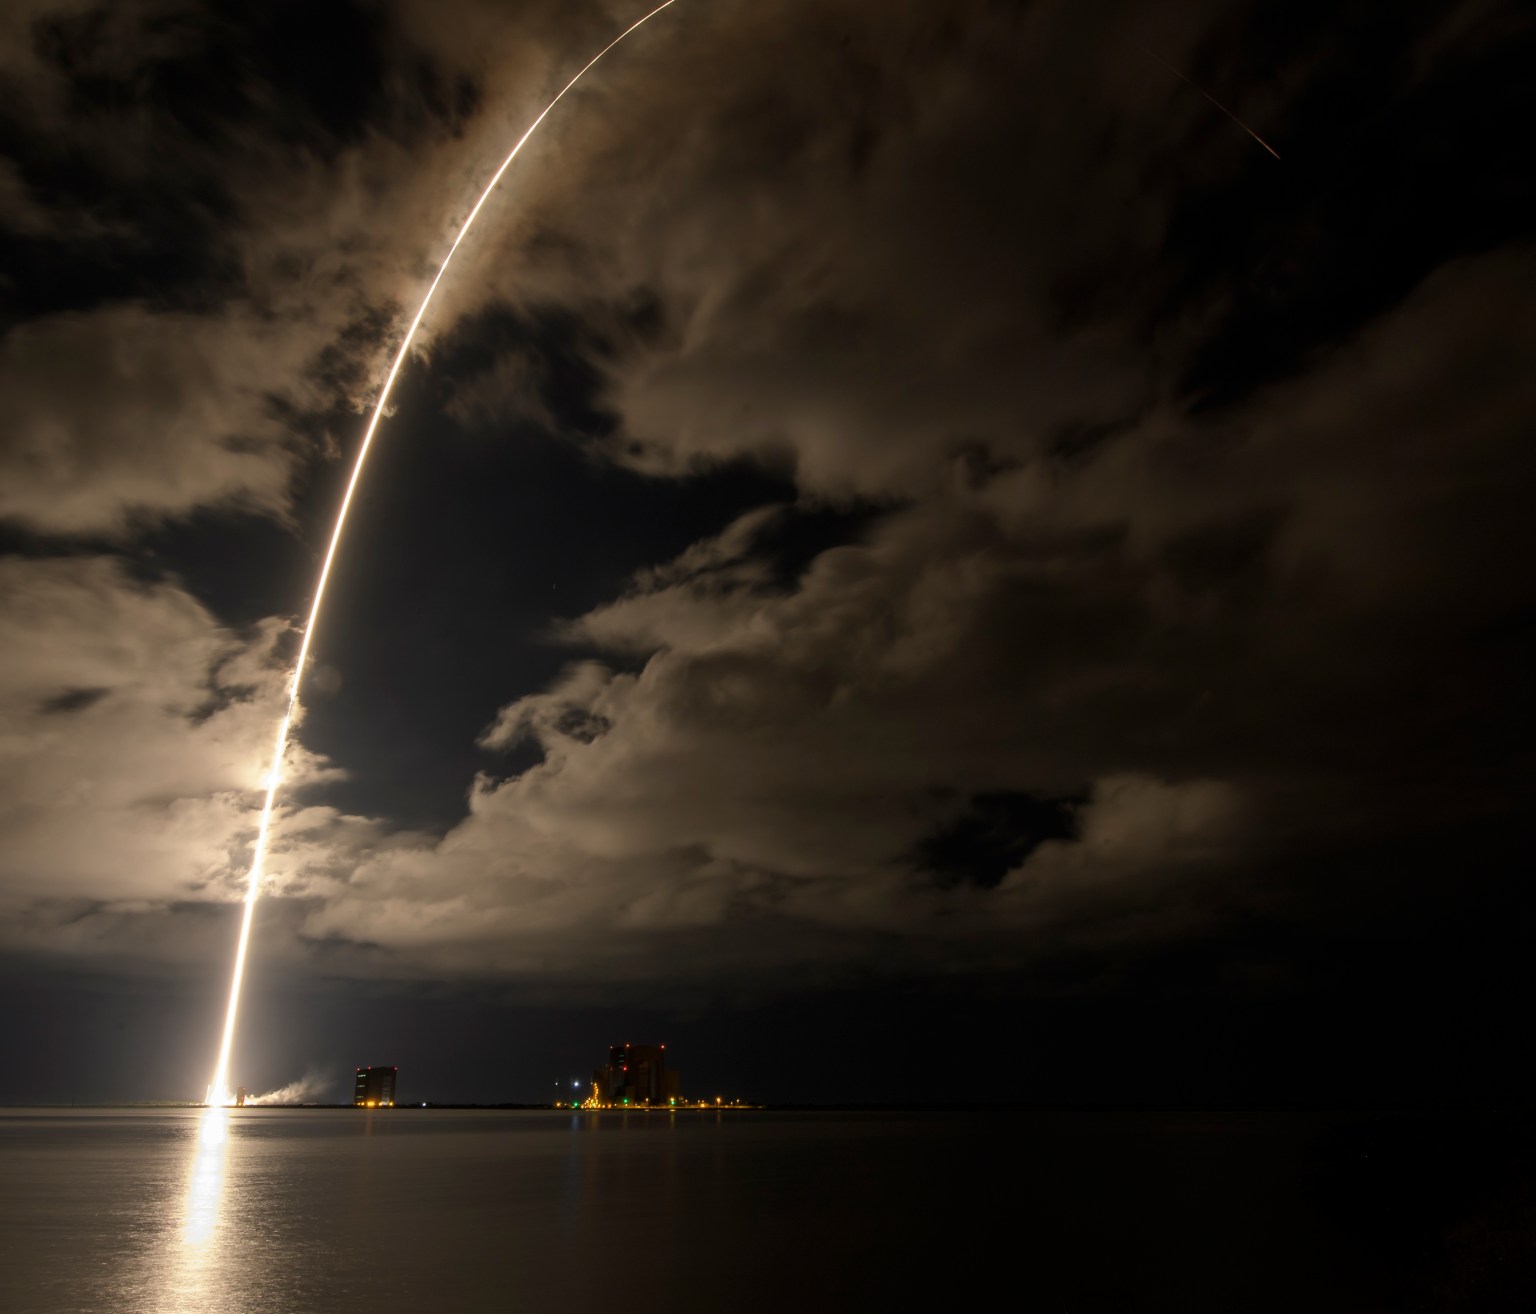 A United Launch Alliance Atlas V rocket with the Lucy spacecraft aboard is seen in this 2 minute and 30 second exposure photograph as it launches from Space Launch Complex 41, Saturday, Oct. 16, 2021, at Cape Canaveral Space Force Station in Florida. Lucy will be the first spacecraft to study Jupiter's Trojan Asteroids. Like the mission's namesake – the fossilized human ancestor, "Lucy," whose skeleton provided unique insight into humanity's evolution – Lucy will revolutionize our knowledge of planetary origins and the formation of the solar system.